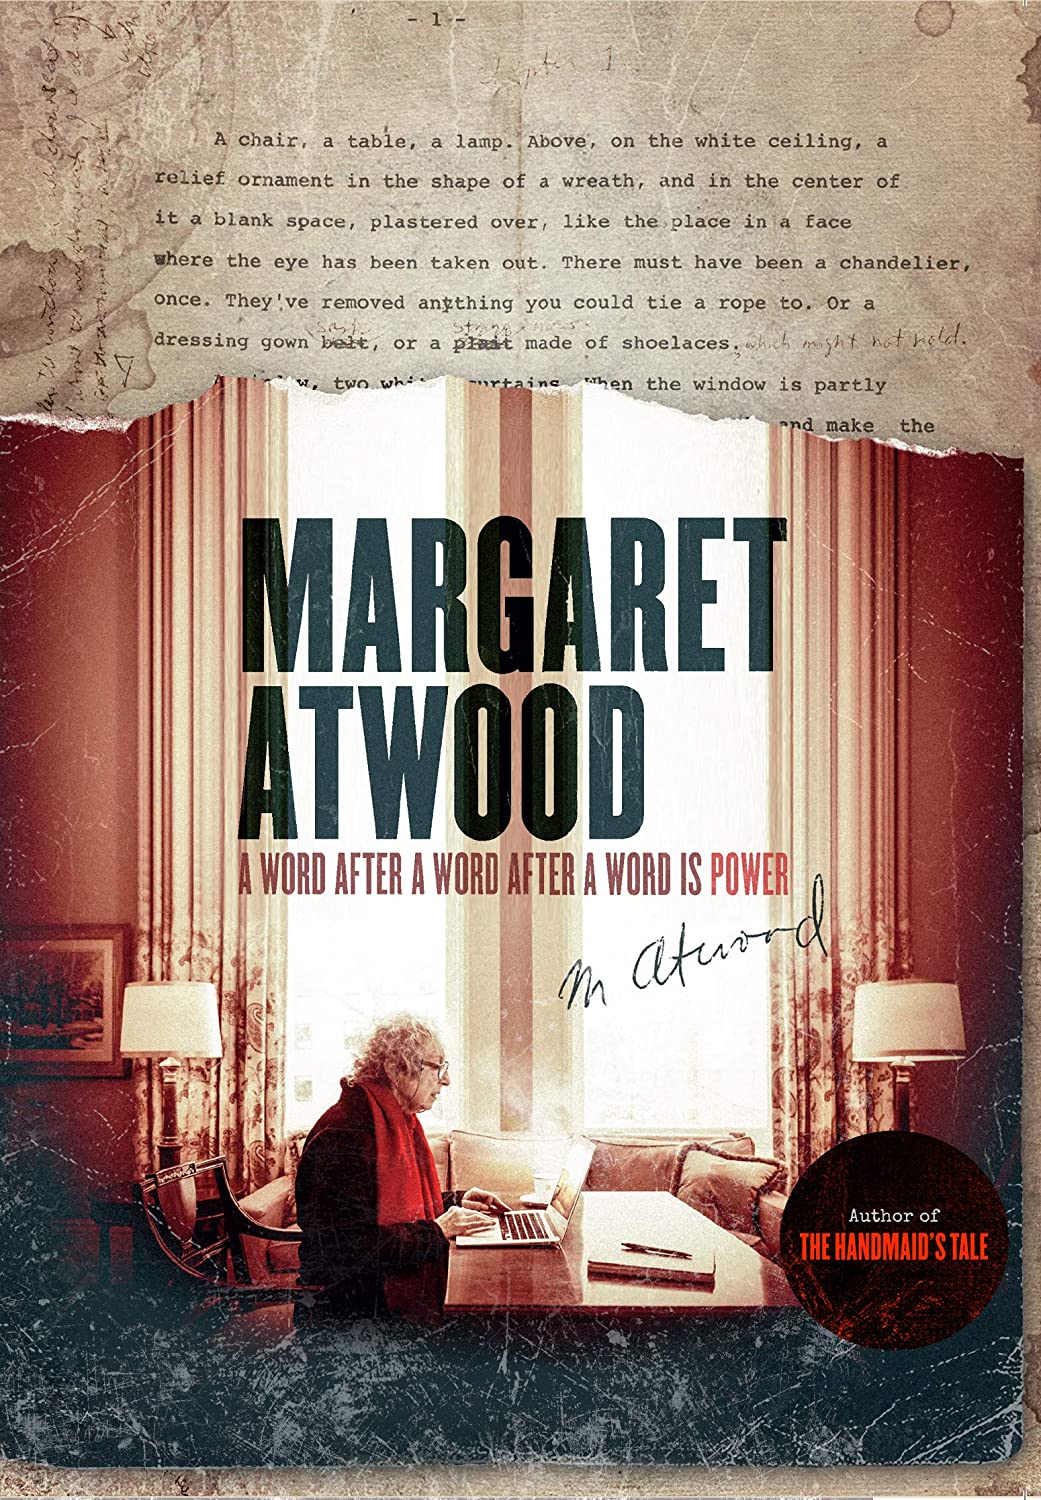 Margaret Atwood: A Word After A Word After A Word Is Power [DVD]